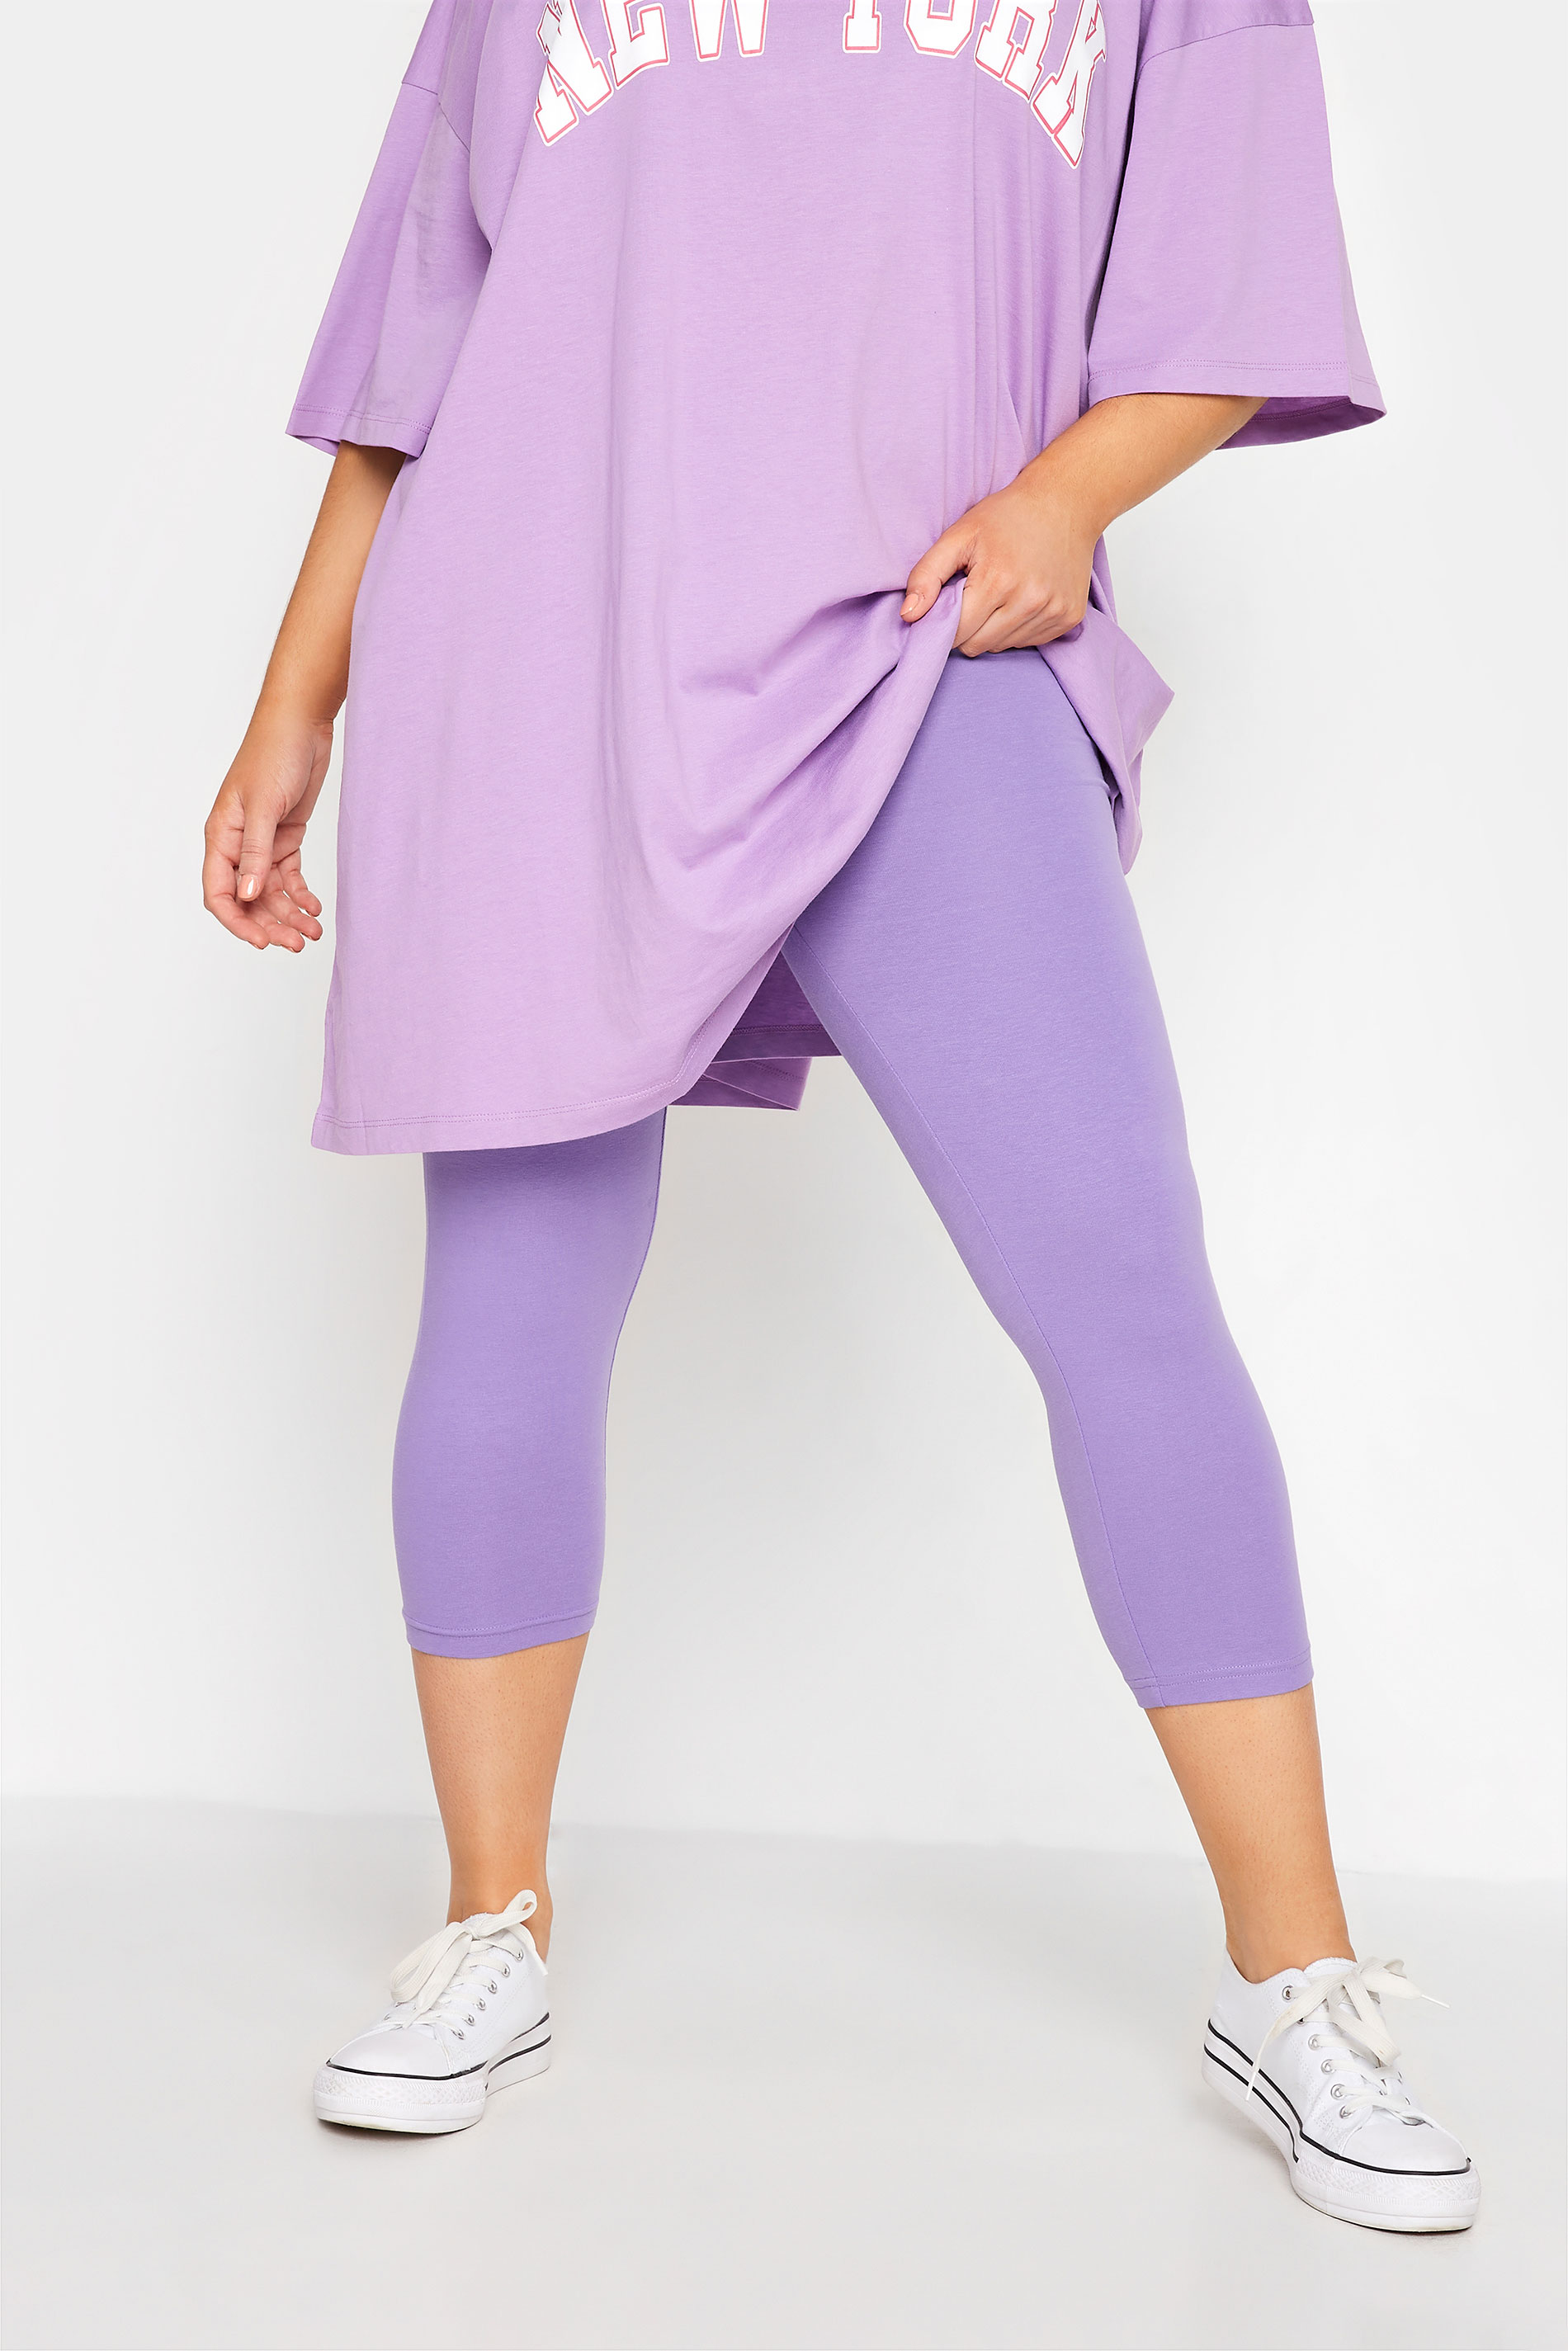 YOURS FOR GOOD Curve Purple Cropped Leggings_A.jpg